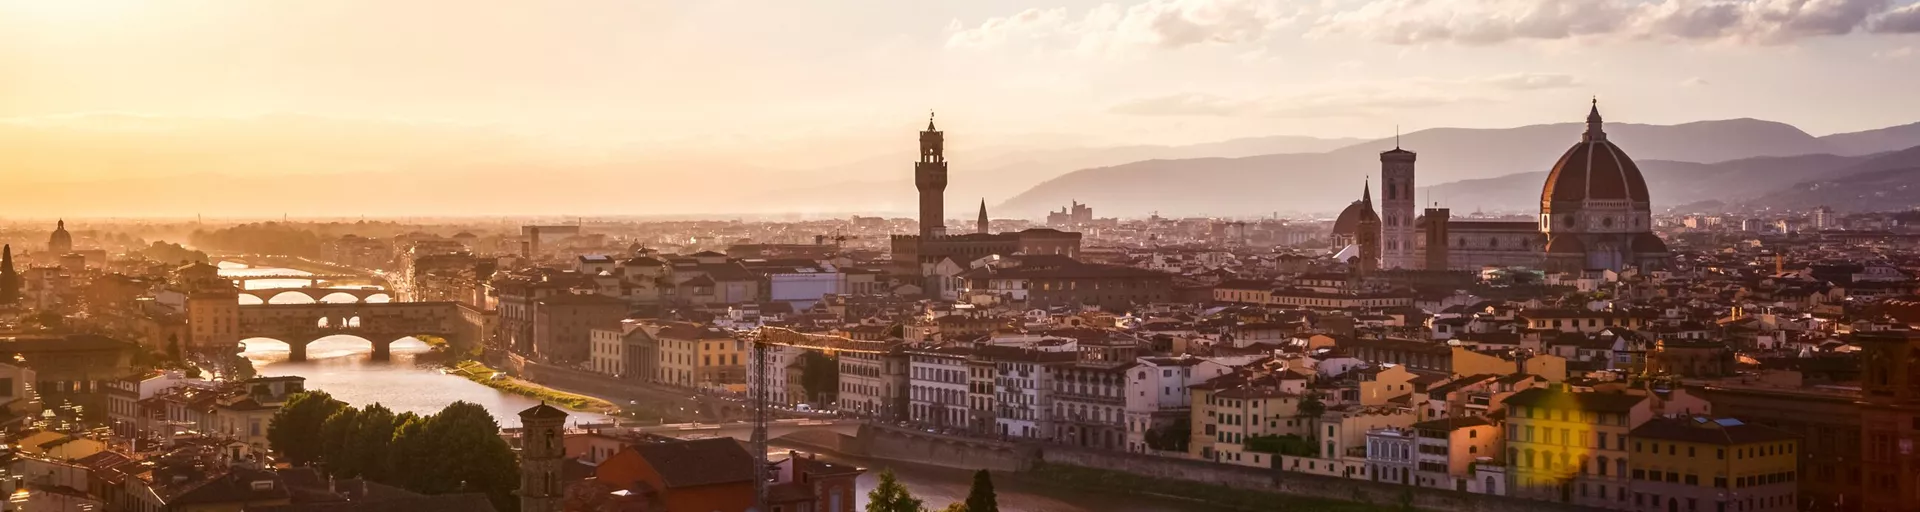 Italy, Tuscany, Florence, Cityscape At Evening Light Seen From Piazzale Michelangelo 